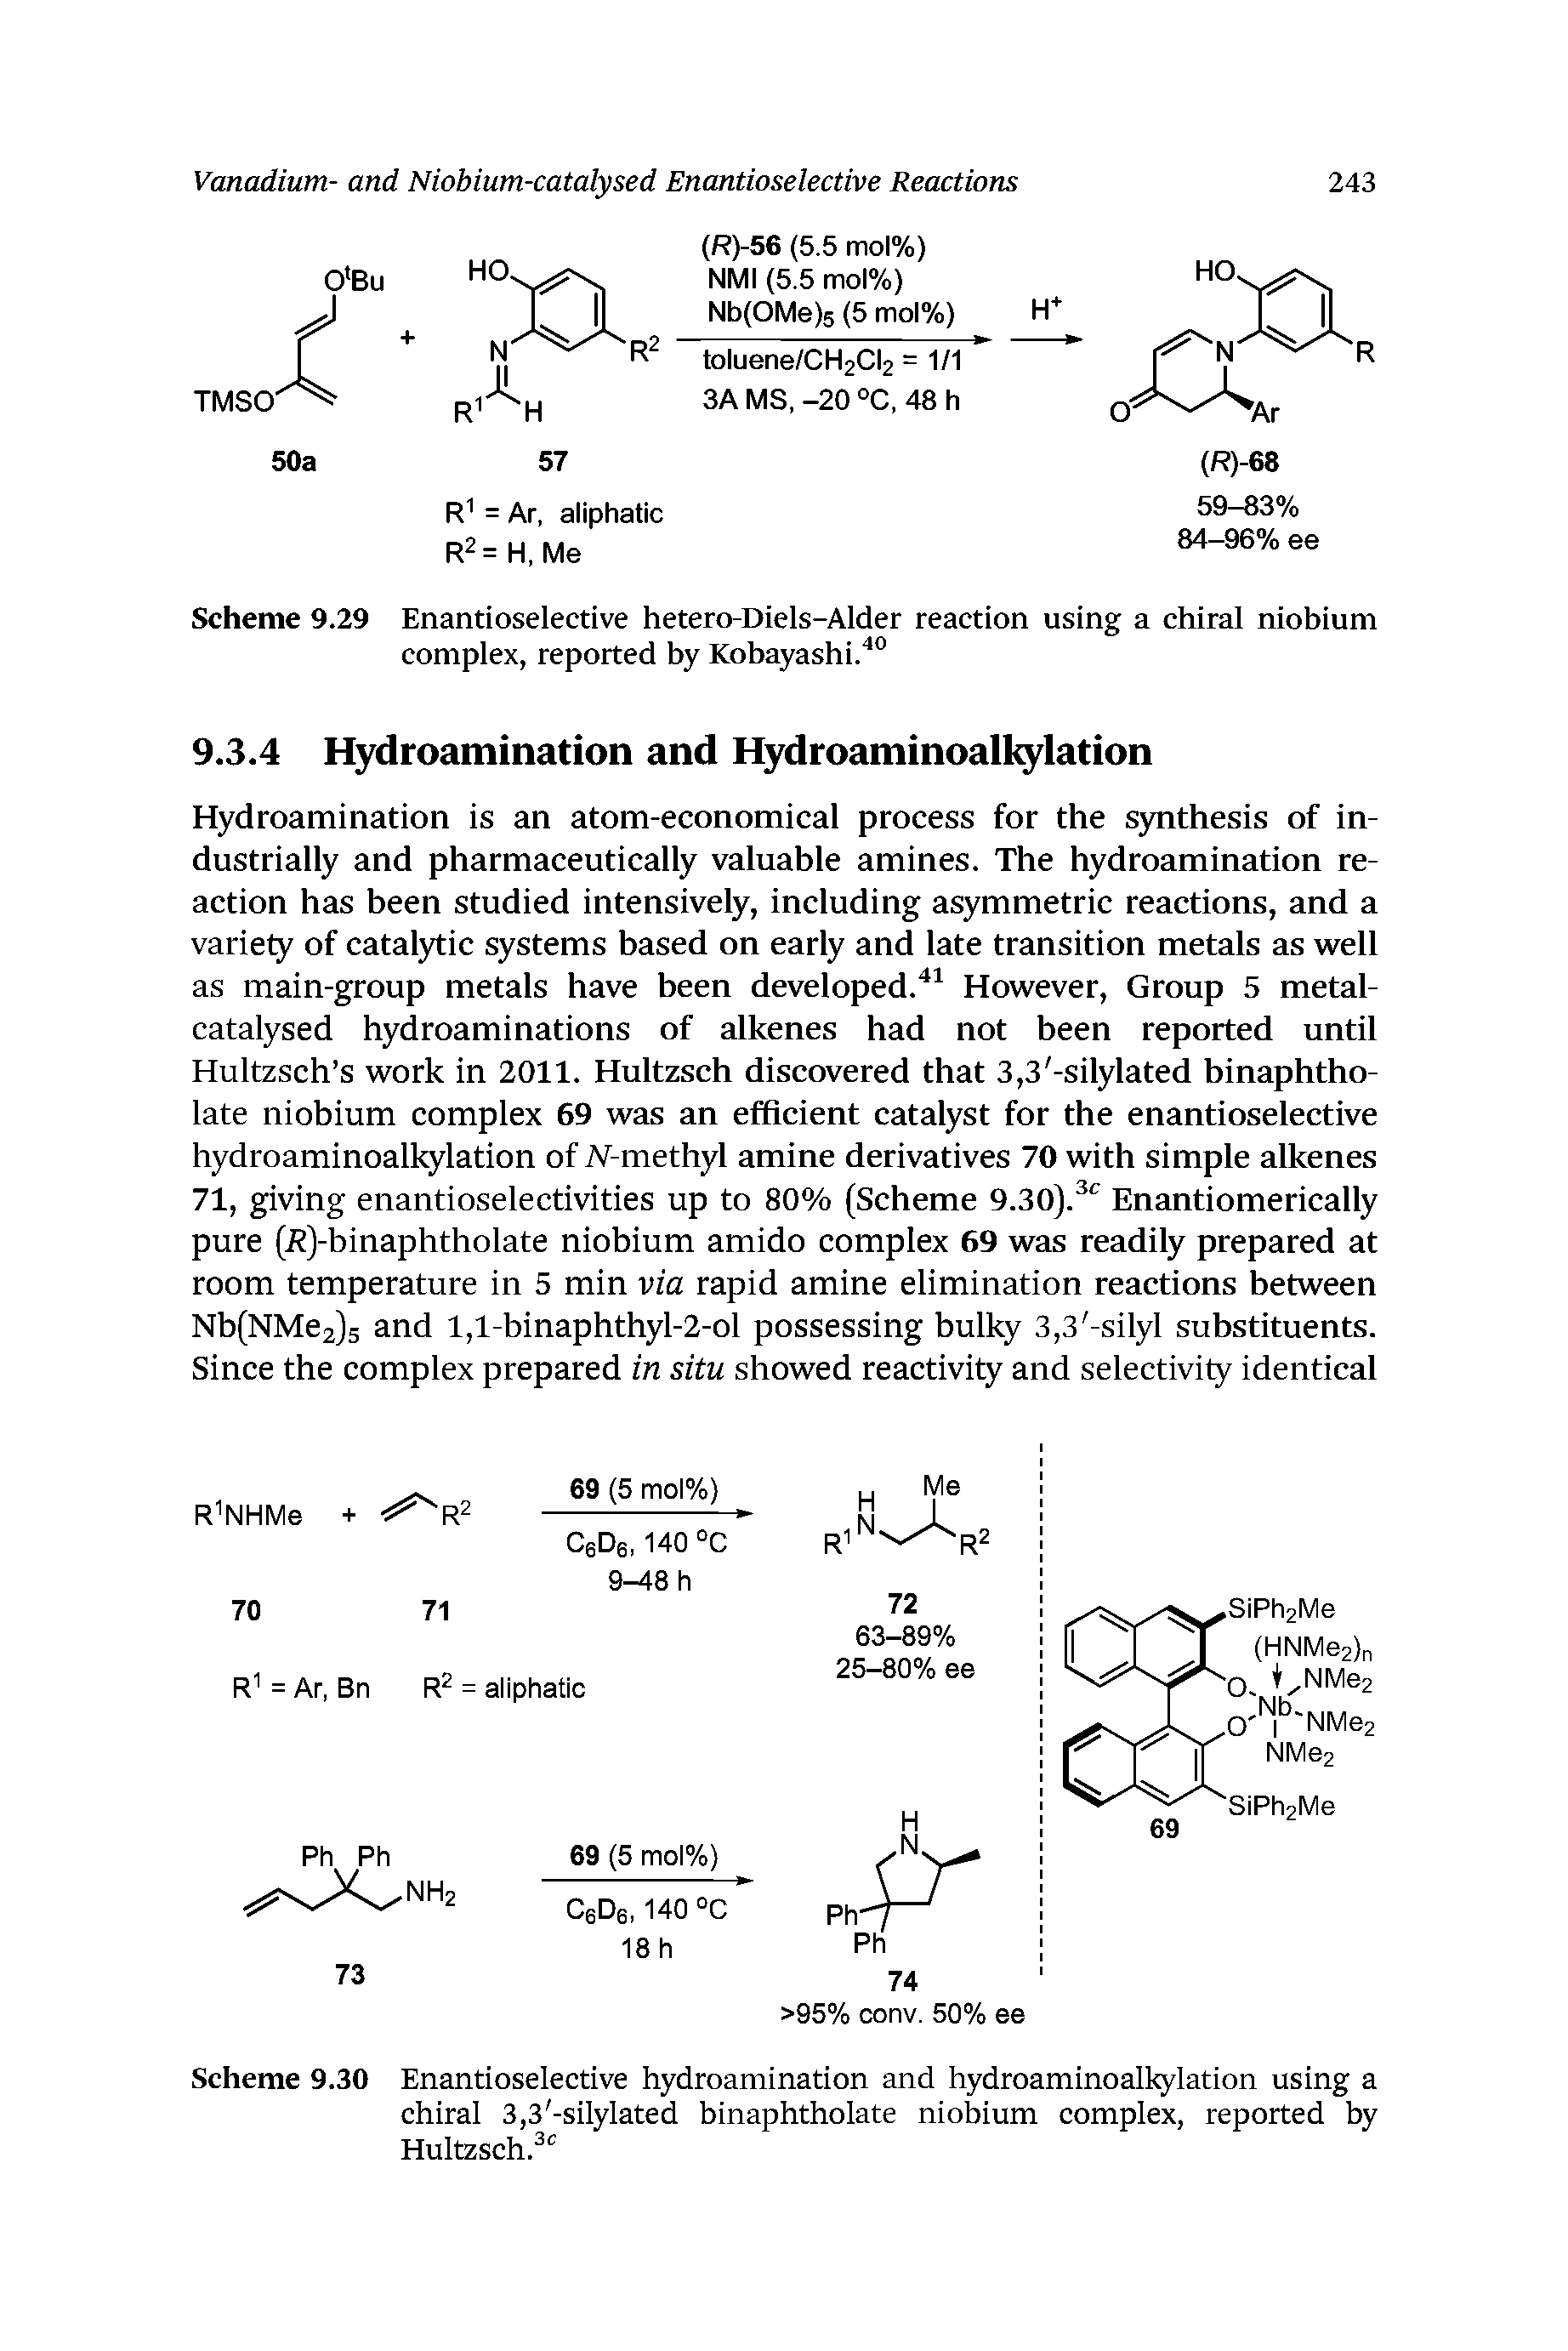 Scheme 9.30 Enantioselective hydroamination and hydroaminoalkylation using a chiral 3,3 -silylated binaphtholate niobium complex, reported by Hultzsch. ...